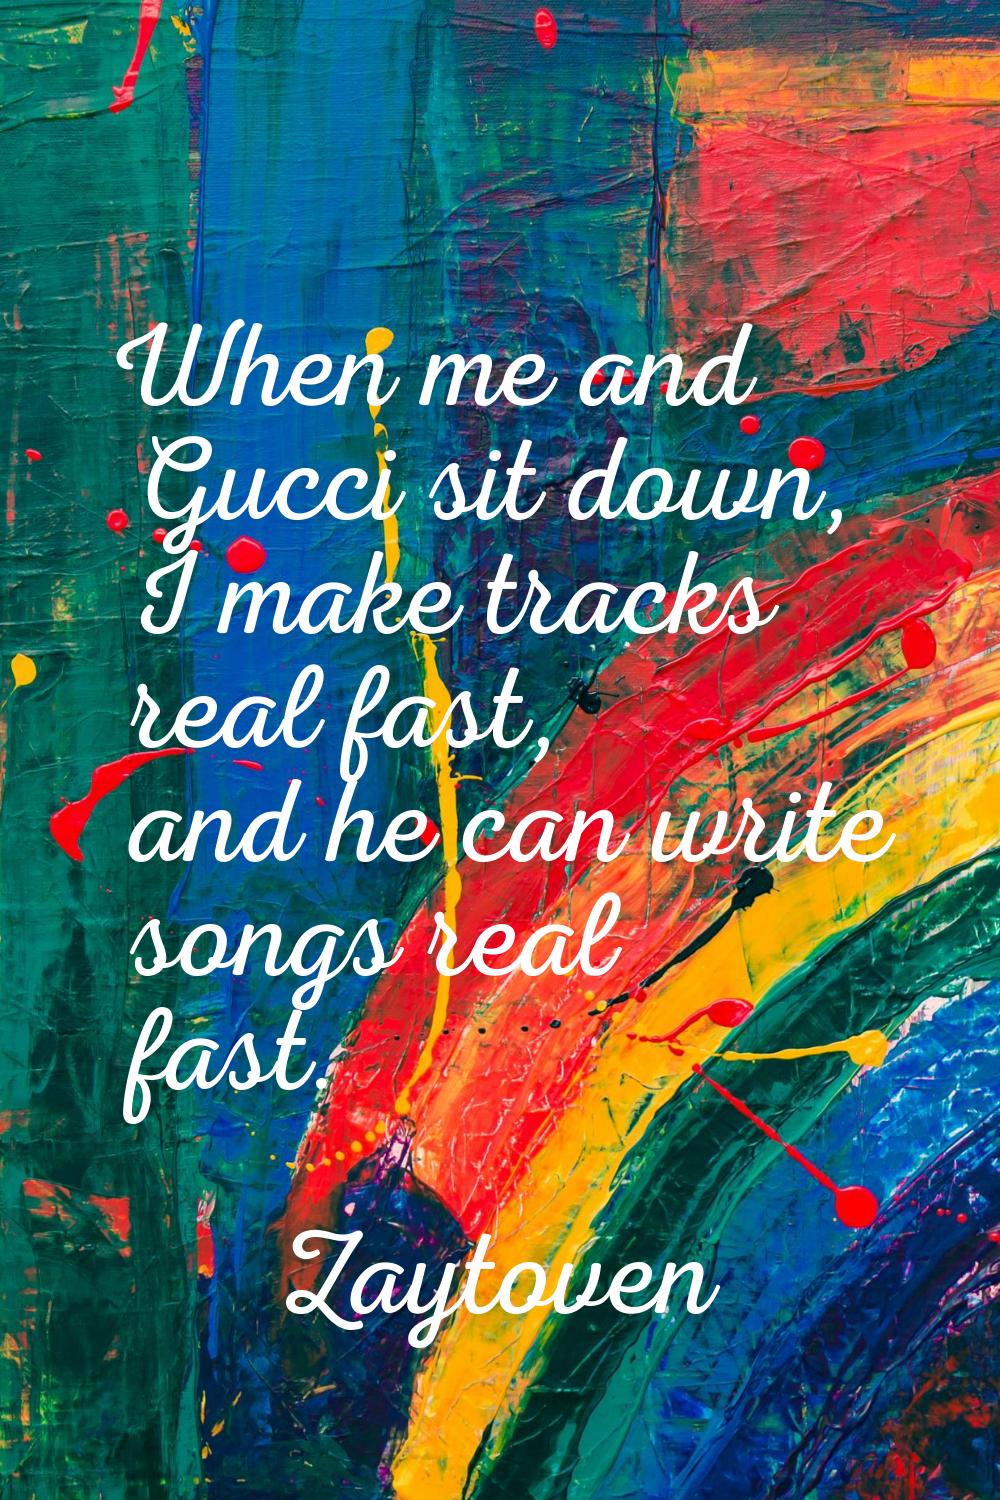 When me and Gucci sit down, I make tracks real fast, and he can write songs real fast.